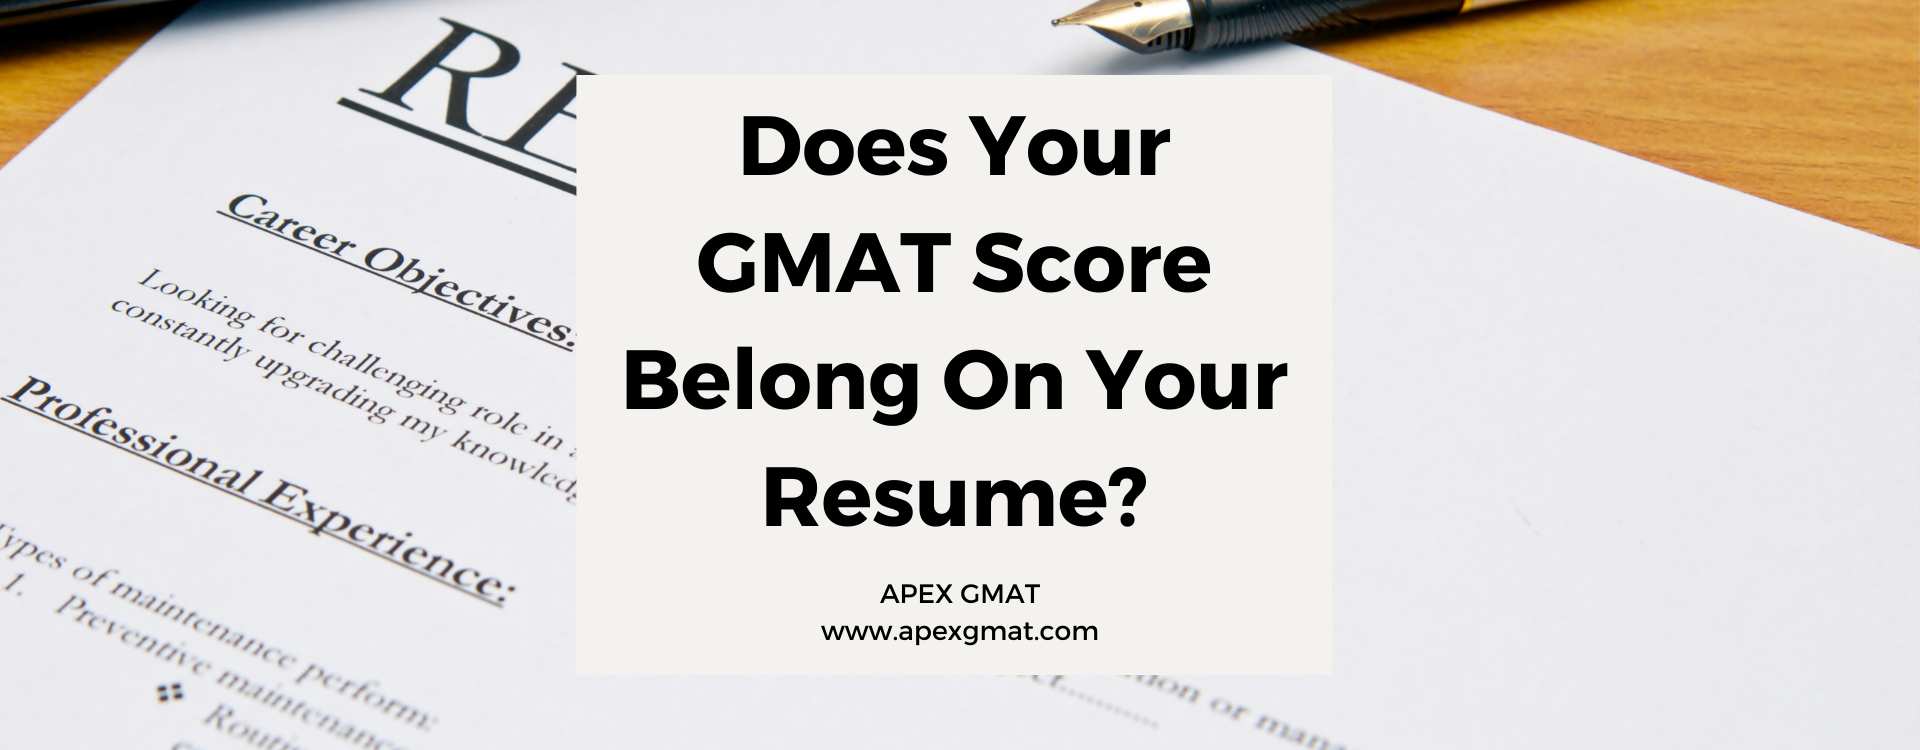 Does Your GMAT Score Belong On Your Resume?